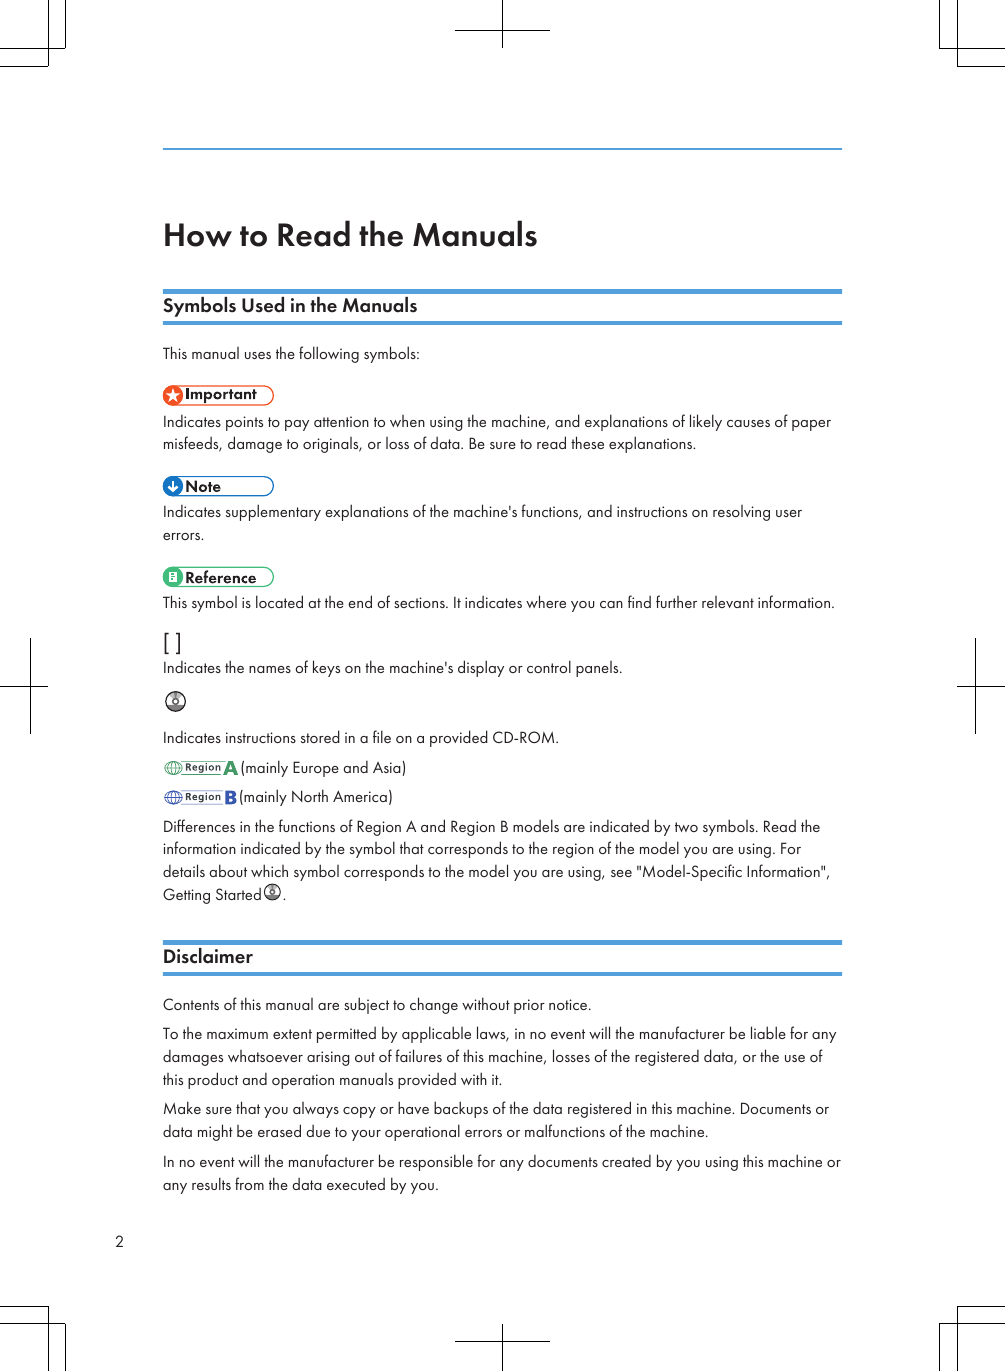 How to Read the ManualsSymbols Used in the ManualsThis manual uses the following symbols:Indicates points to pay attention to when using the machine, and explanations of likely causes of papermisfeeds, damage to originals, or loss of data. Be sure to read these explanations.Indicates supplementary explanations of the machine&apos;s functions, and instructions on resolving usererrors.This symbol is located at the end of sections. It indicates where you can find further relevant information.[ ]Indicates the names of keys on the machine&apos;s display or control panels.Indicates instructions stored in a file on a provided CD-ROM.(mainly Europe and Asia)(mainly North America)Differences in the functions of Region A and Region B models are indicated by two symbols. Read theinformation indicated by the symbol that corresponds to the region of the model you are using. Fordetails about which symbol corresponds to the model you are using, see &quot;Model-Specific Information&quot;,Getting Started .DisclaimerContents of this manual are subject to change without prior notice.To the maximum extent permitted by applicable laws, in no event will the manufacturer be liable for anydamages whatsoever arising out of failures of this machine, losses of the registered data, or the use ofthis product and operation manuals provided with it.Make sure that you always copy or have backups of the data registered in this machine. Documents ordata might be erased due to your operational errors or malfunctions of the machine.In no event will the manufacturer be responsible for any documents created by you using this machine orany results from the data executed by you.2